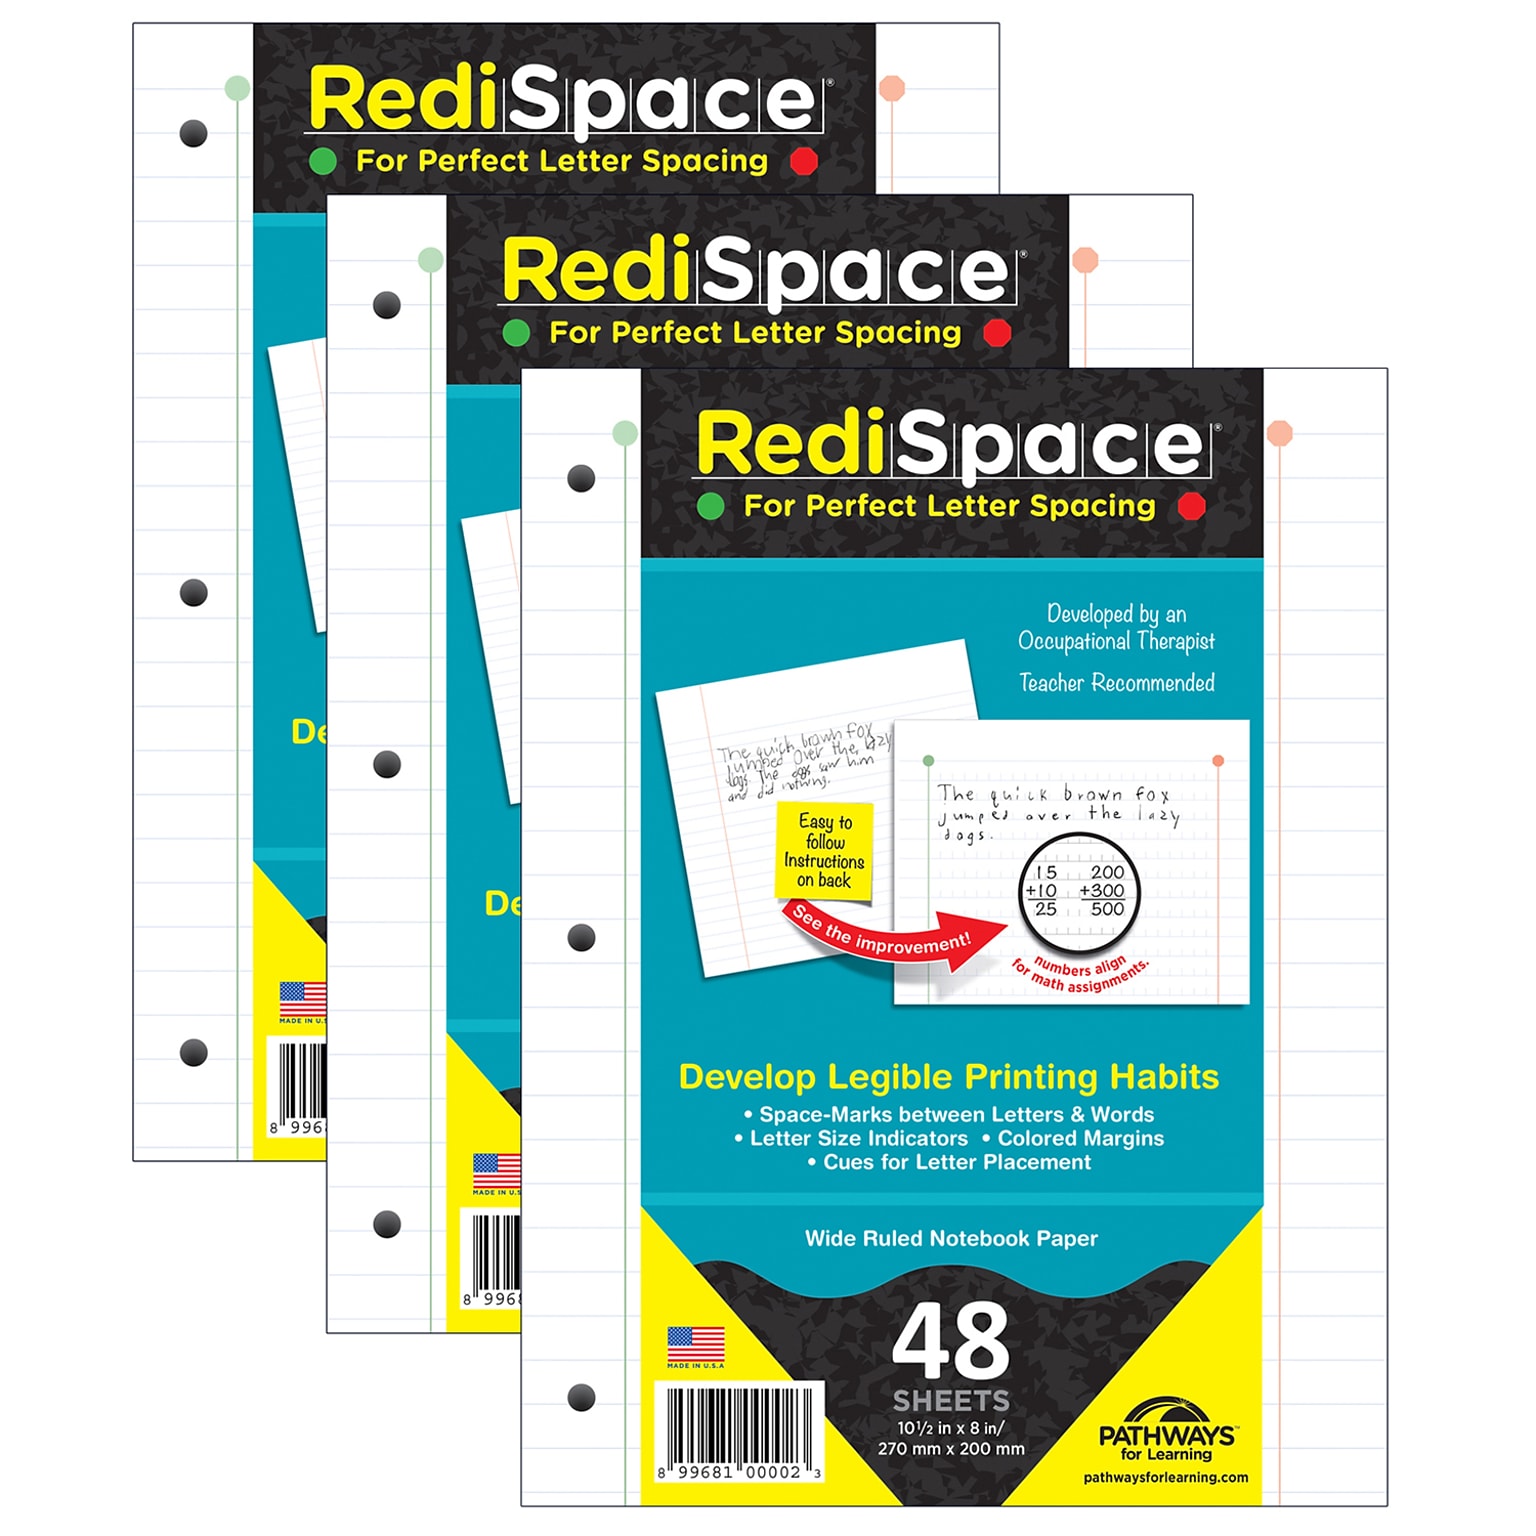 Pathways For Learning RediSpace® Wide Ruled Notebook Filler Paper, 10.5 x 8, White, 48 Sheets Per Pack, 3 Packs (RS-48FP-3)